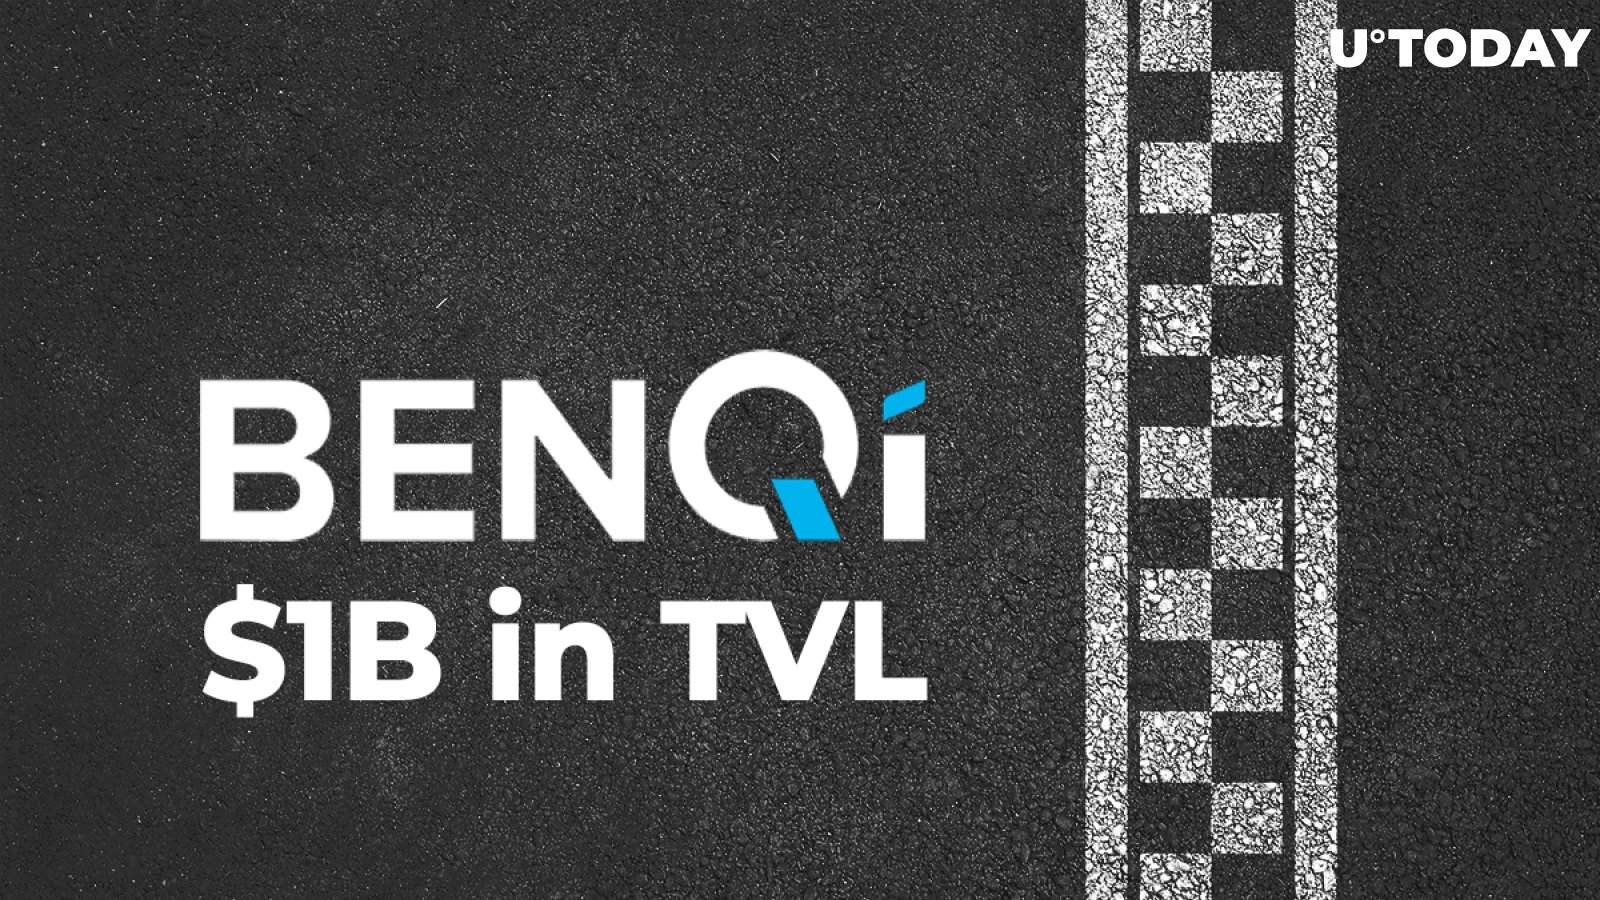 BENQI, an Avalanche Lending Protocol, Crosses $1B in TVL Only Days After Launch